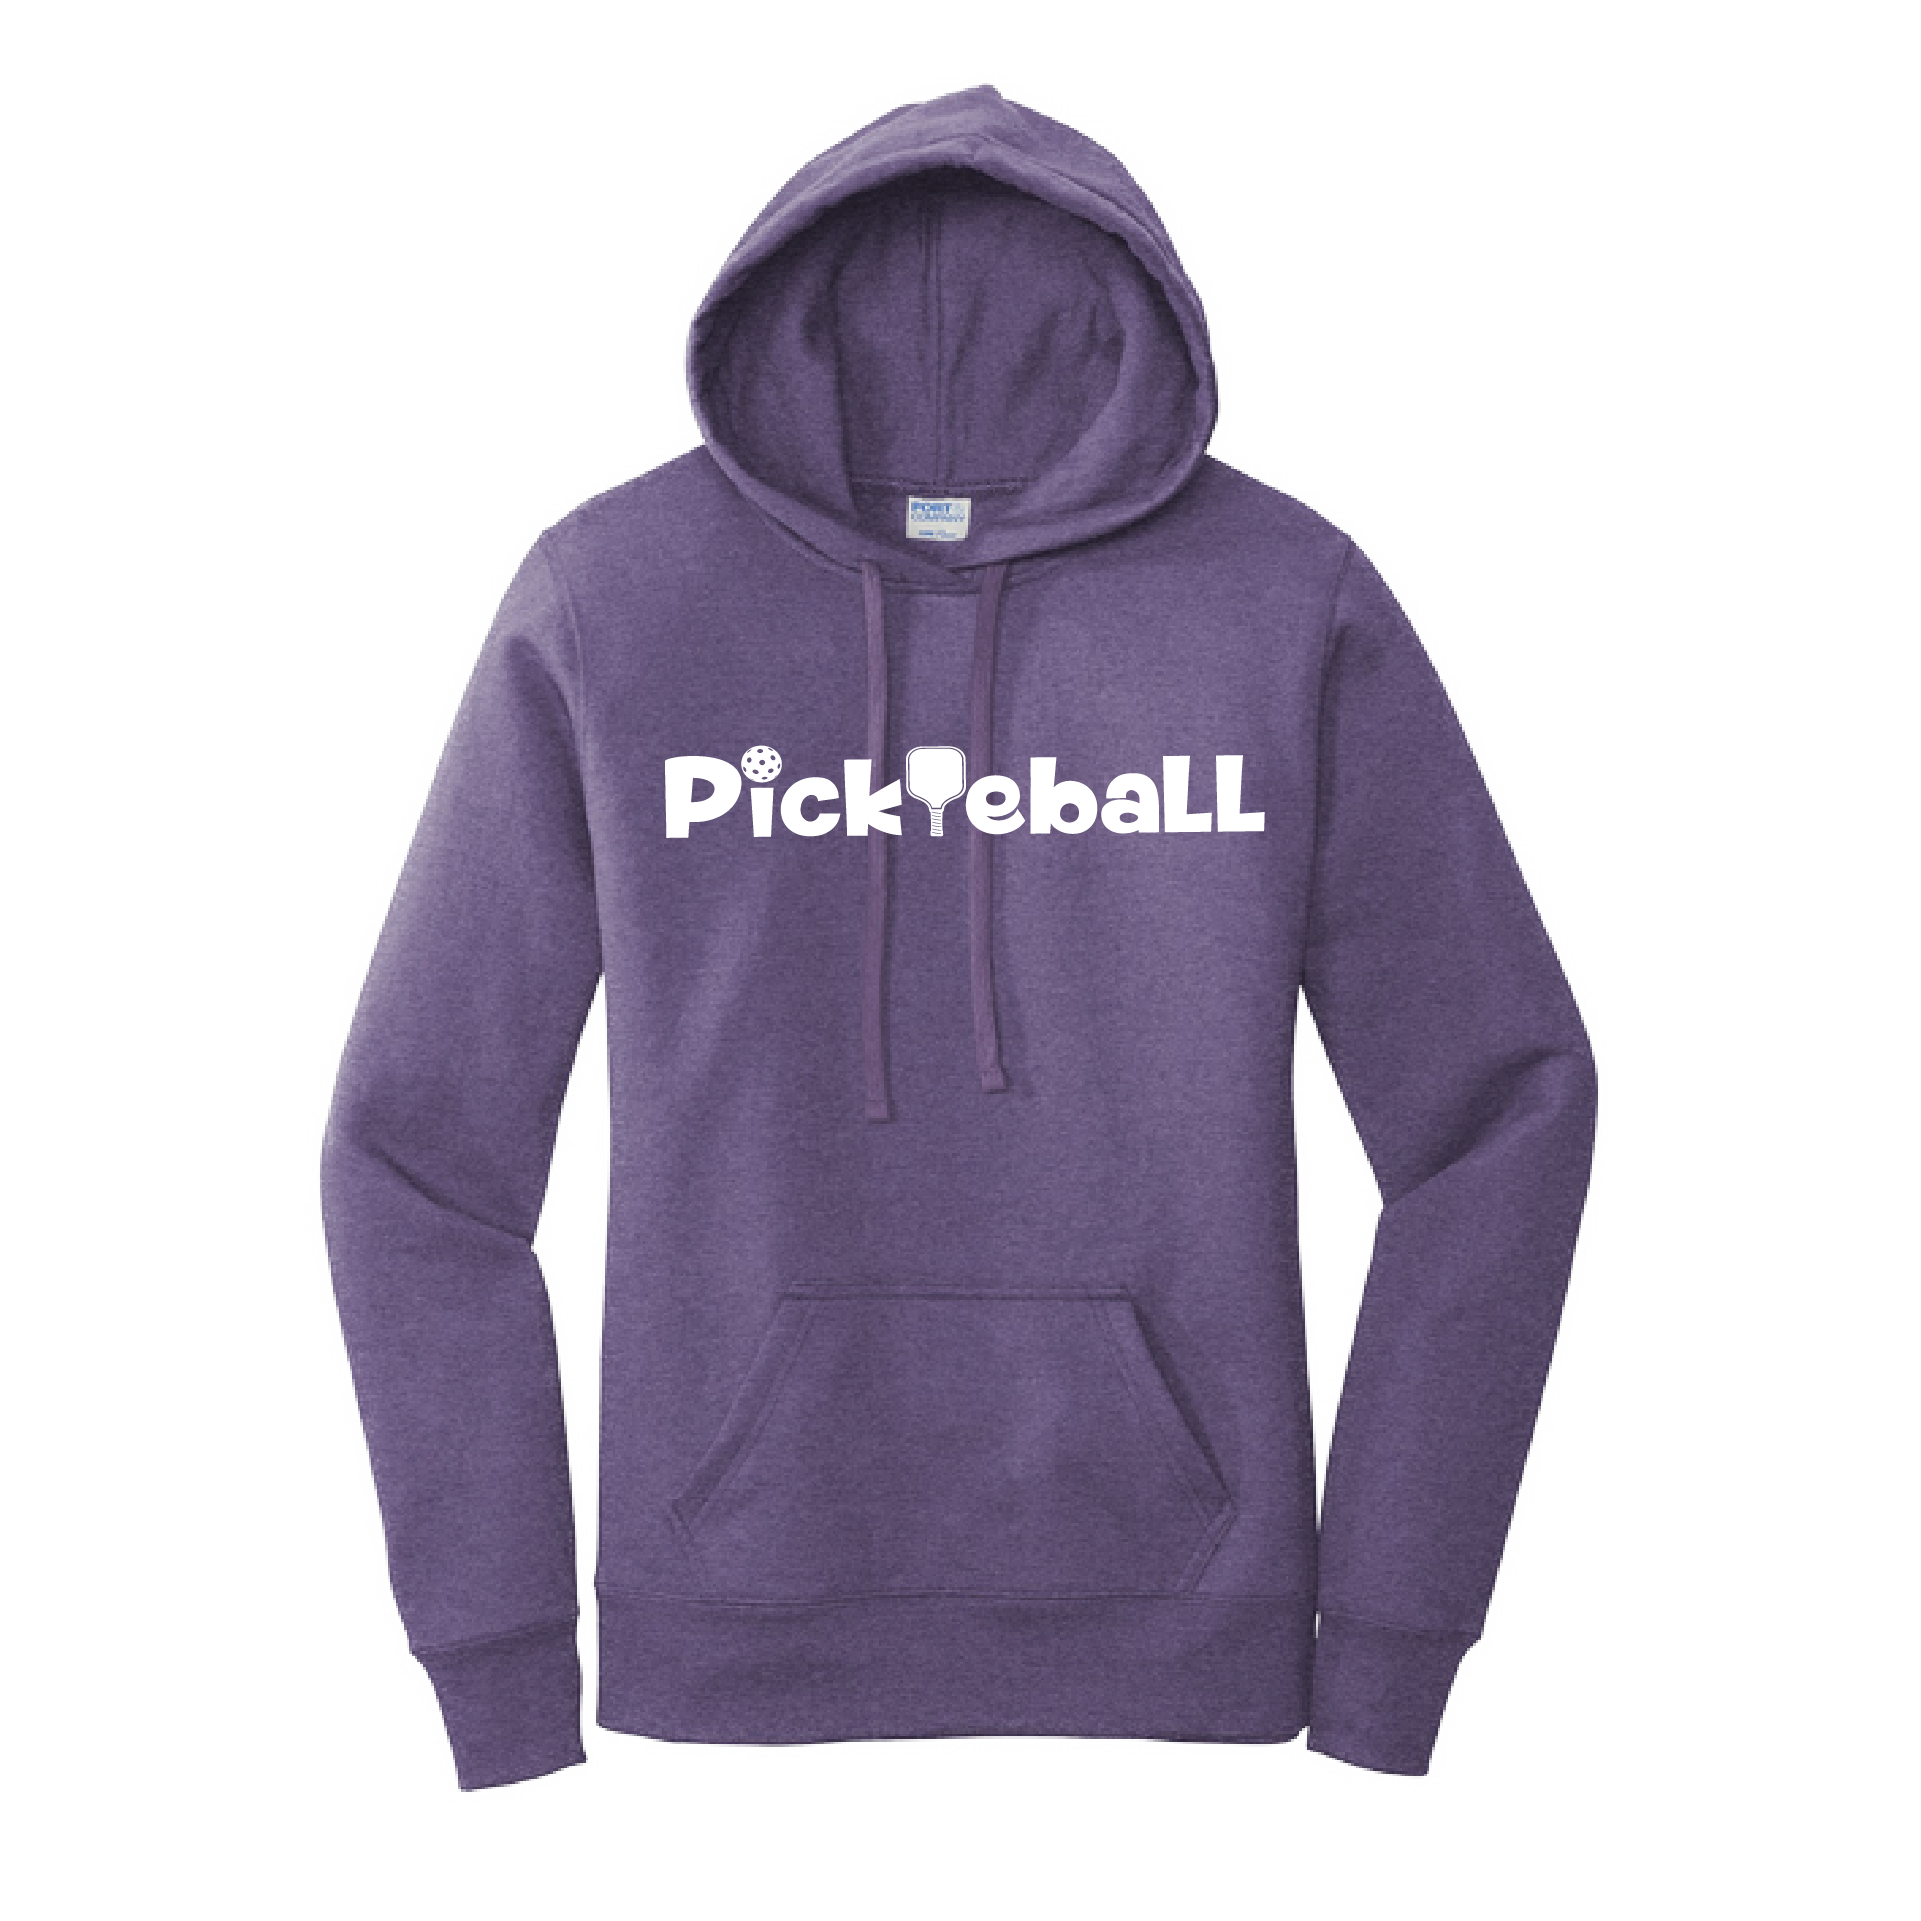 Pickleball Design: Pickleball Horizontal customizable location Women's Hooded pullover Sweatshirt  Turn up the volume in this Women's Sweatshirts with its perfect mix of softness and attitude.  Ultra soft lined inside with a lined hood also.  This is fitted nicely for a women's figure.  Front pouch pocket.